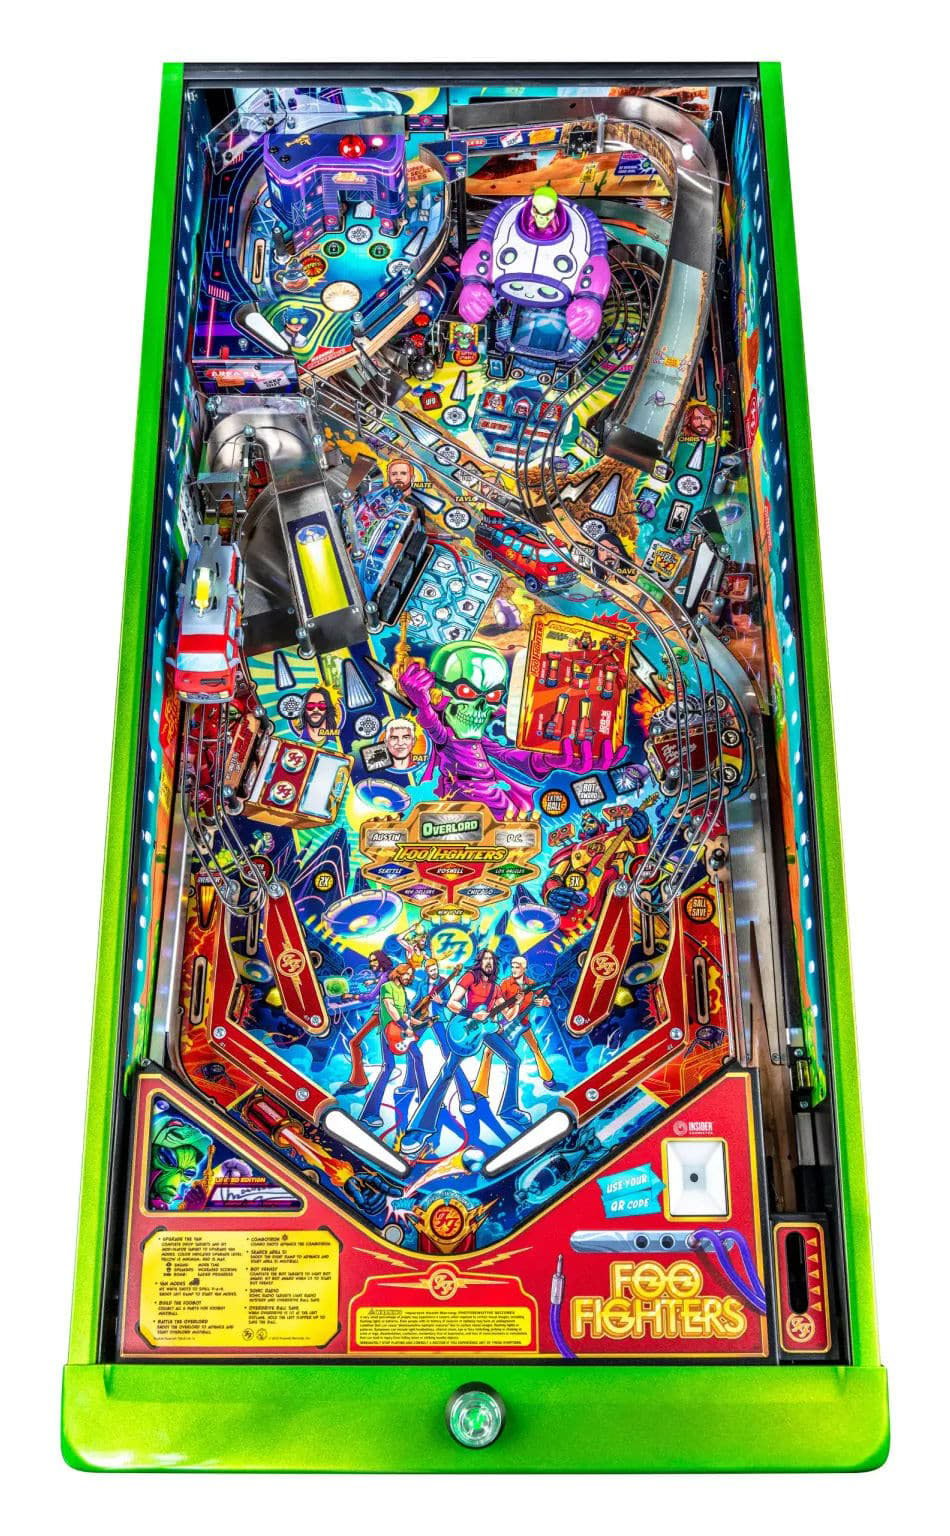 Foo Fighters LE Pinball Machine - Playfield Plan